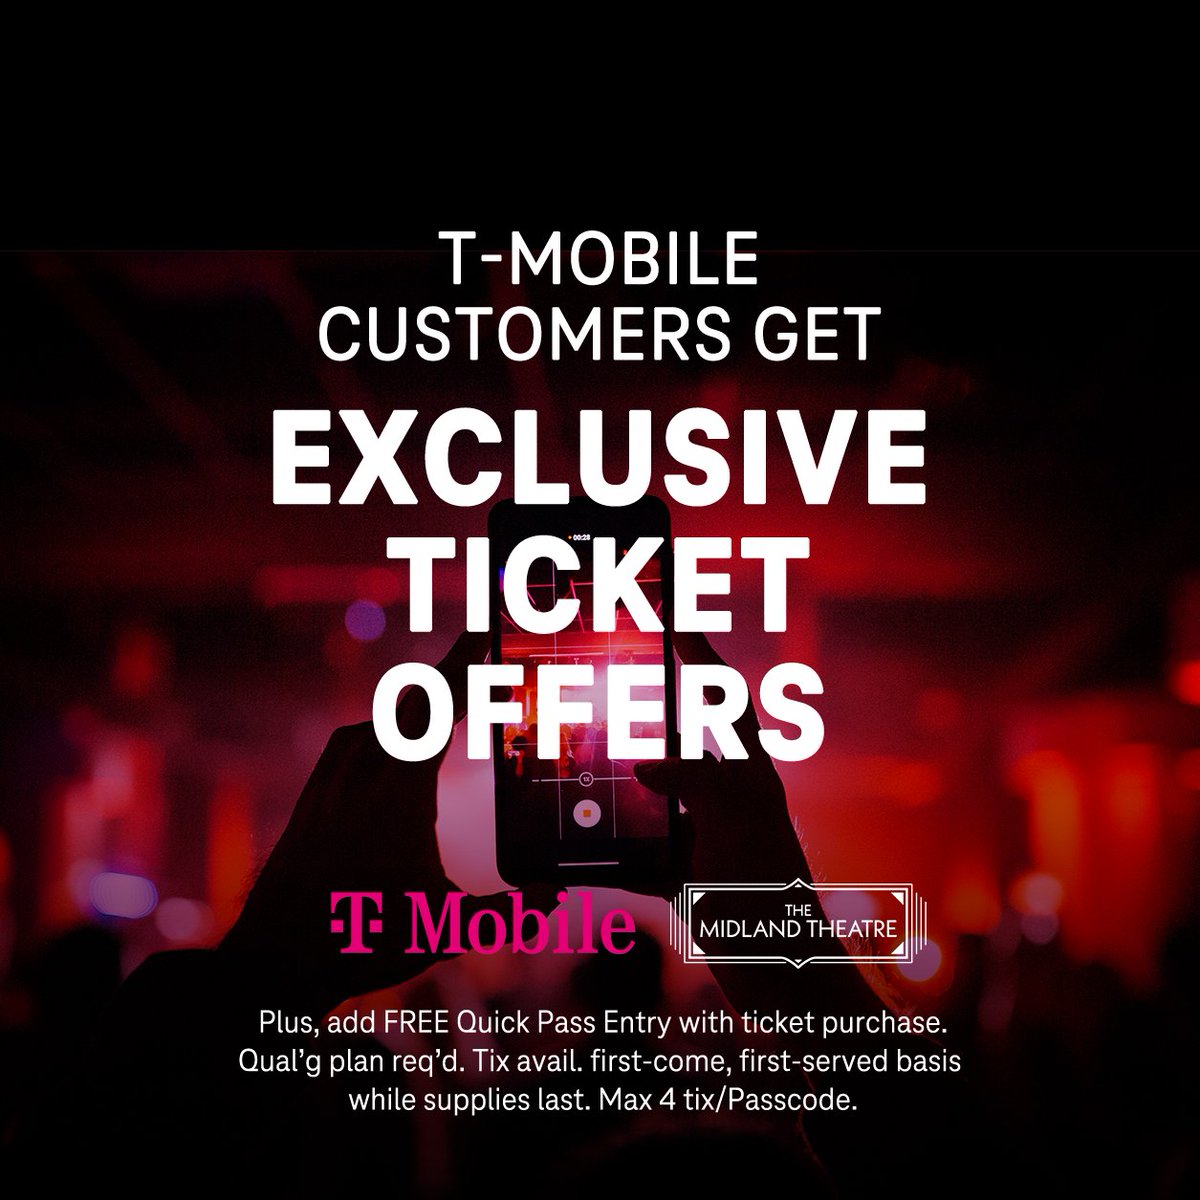 Get exclusive ticket offers when you’re a @tmobile customer 🤘 Click link in bio for more info!